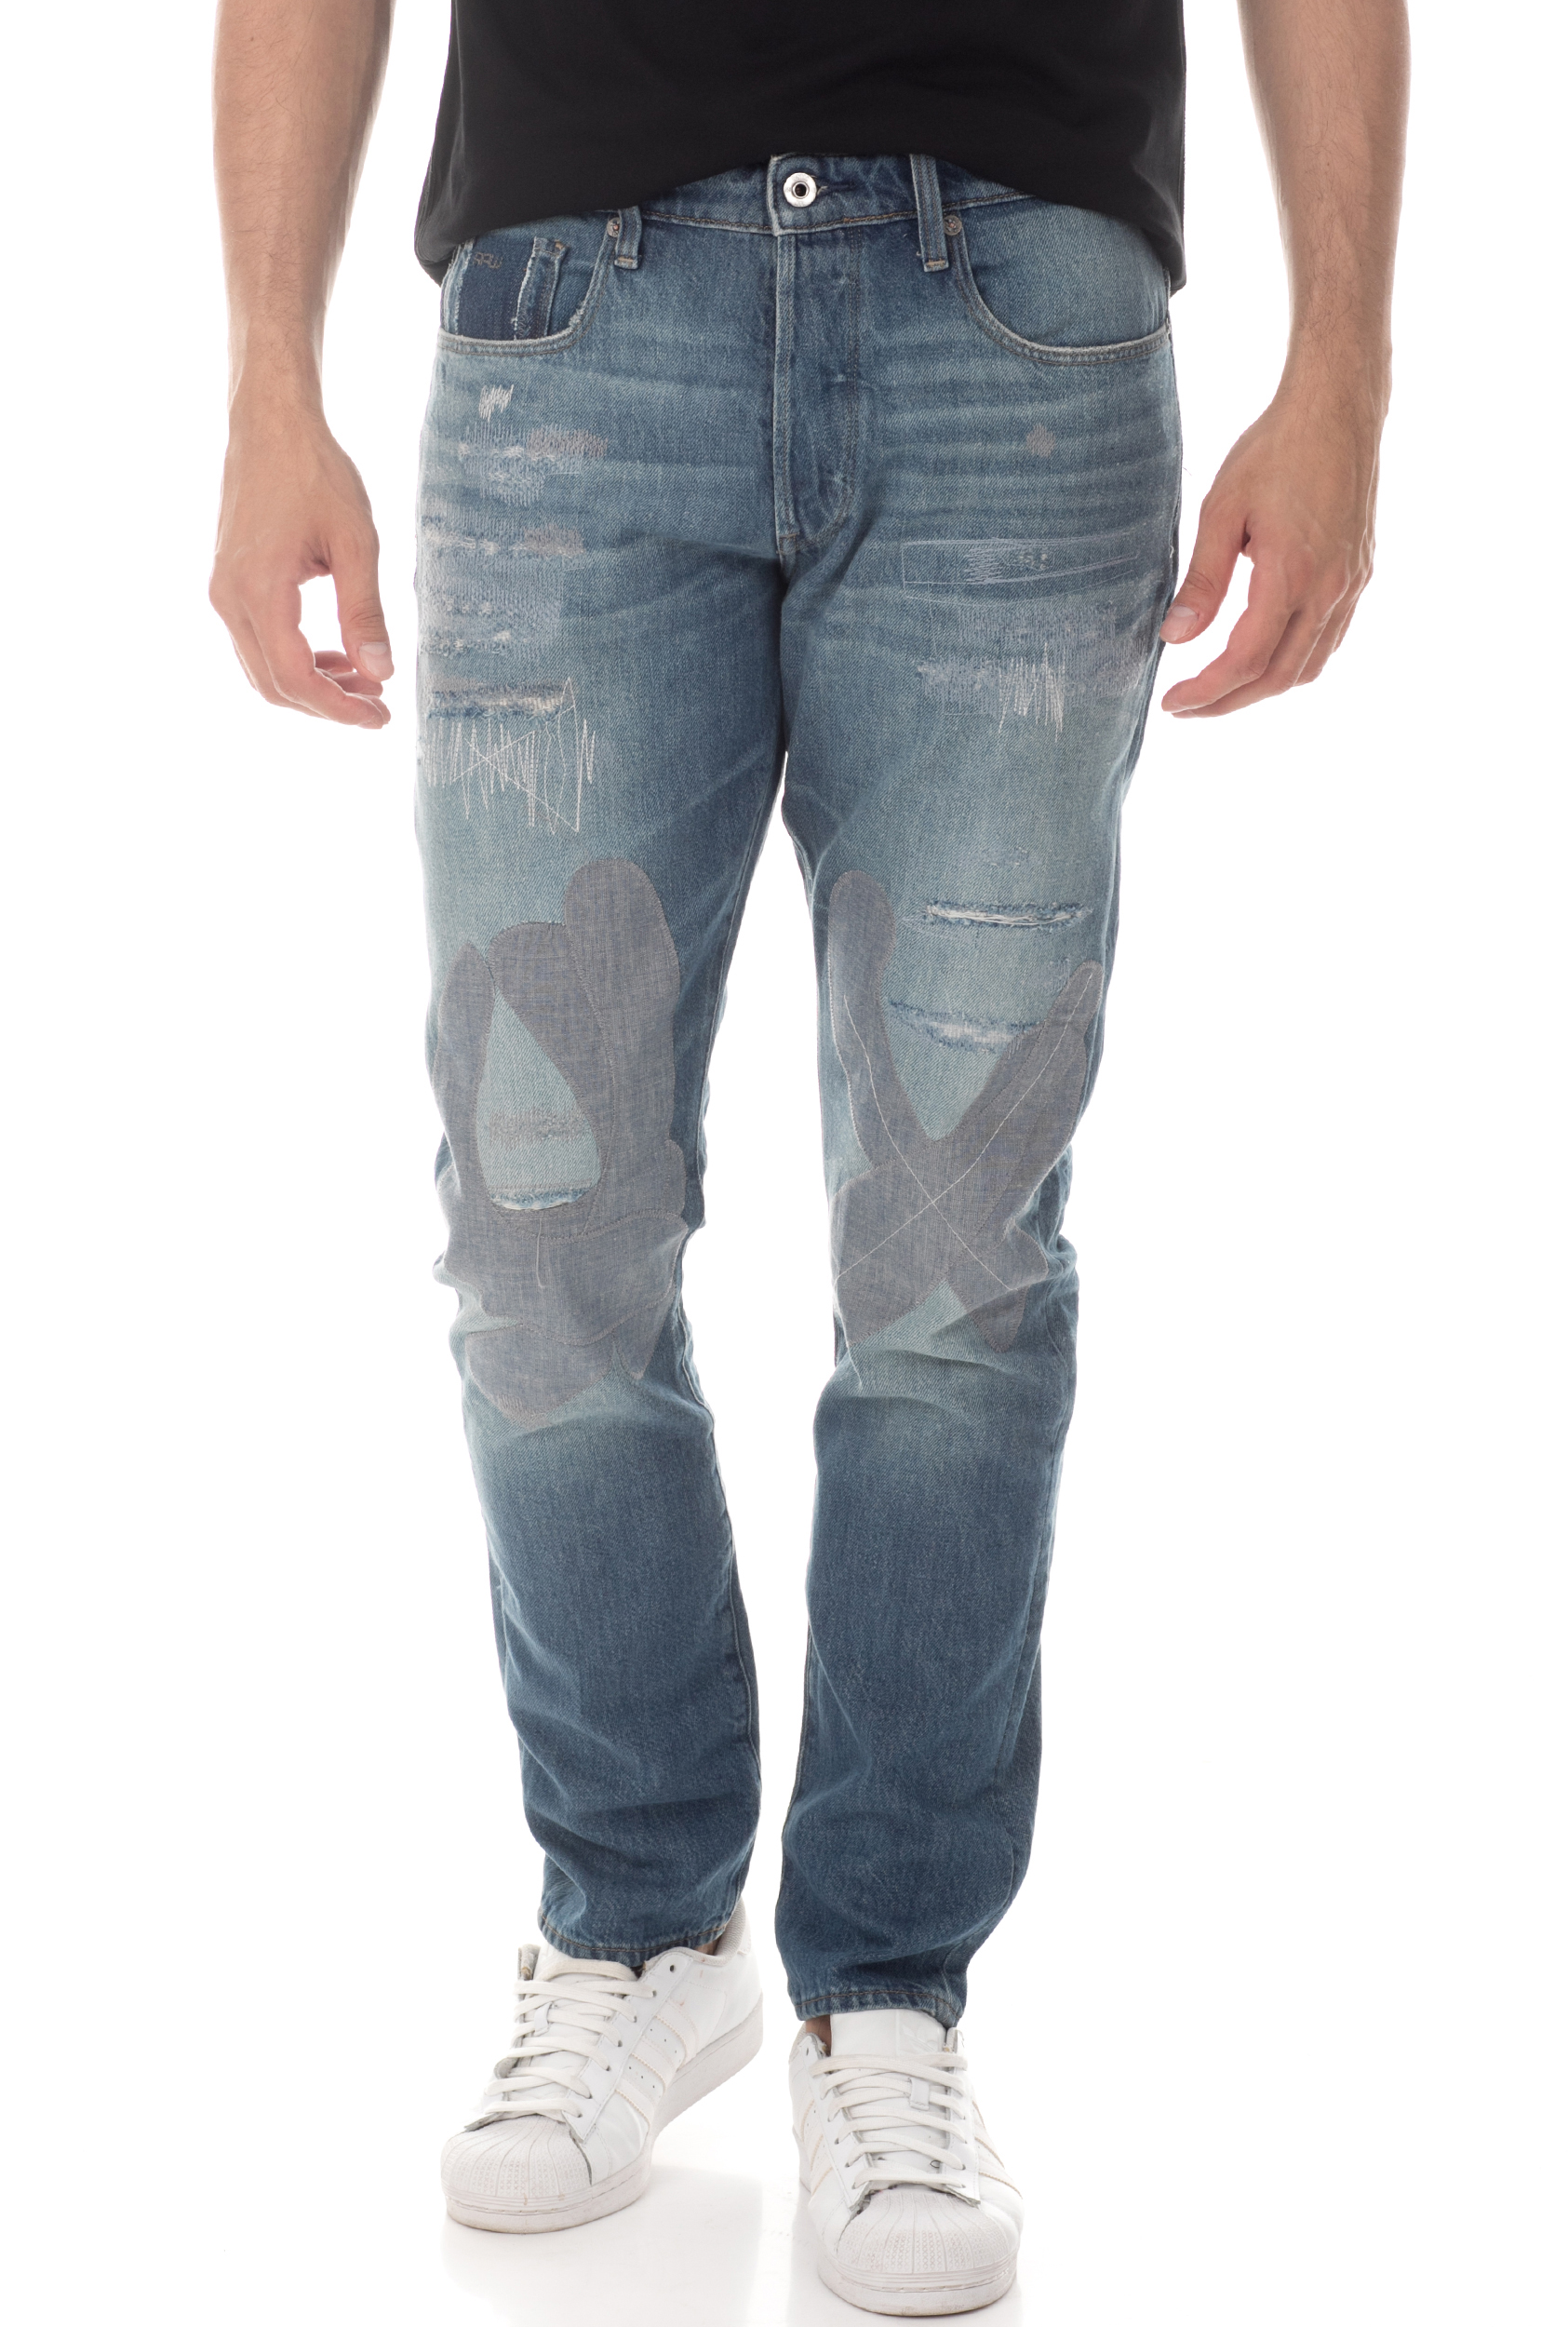 G-STAR RAW G-STAR - Ανδρικό τζιν παντελόνι 3301 G-STAR STRAIGHT TAPERED TAPE RES μπλε